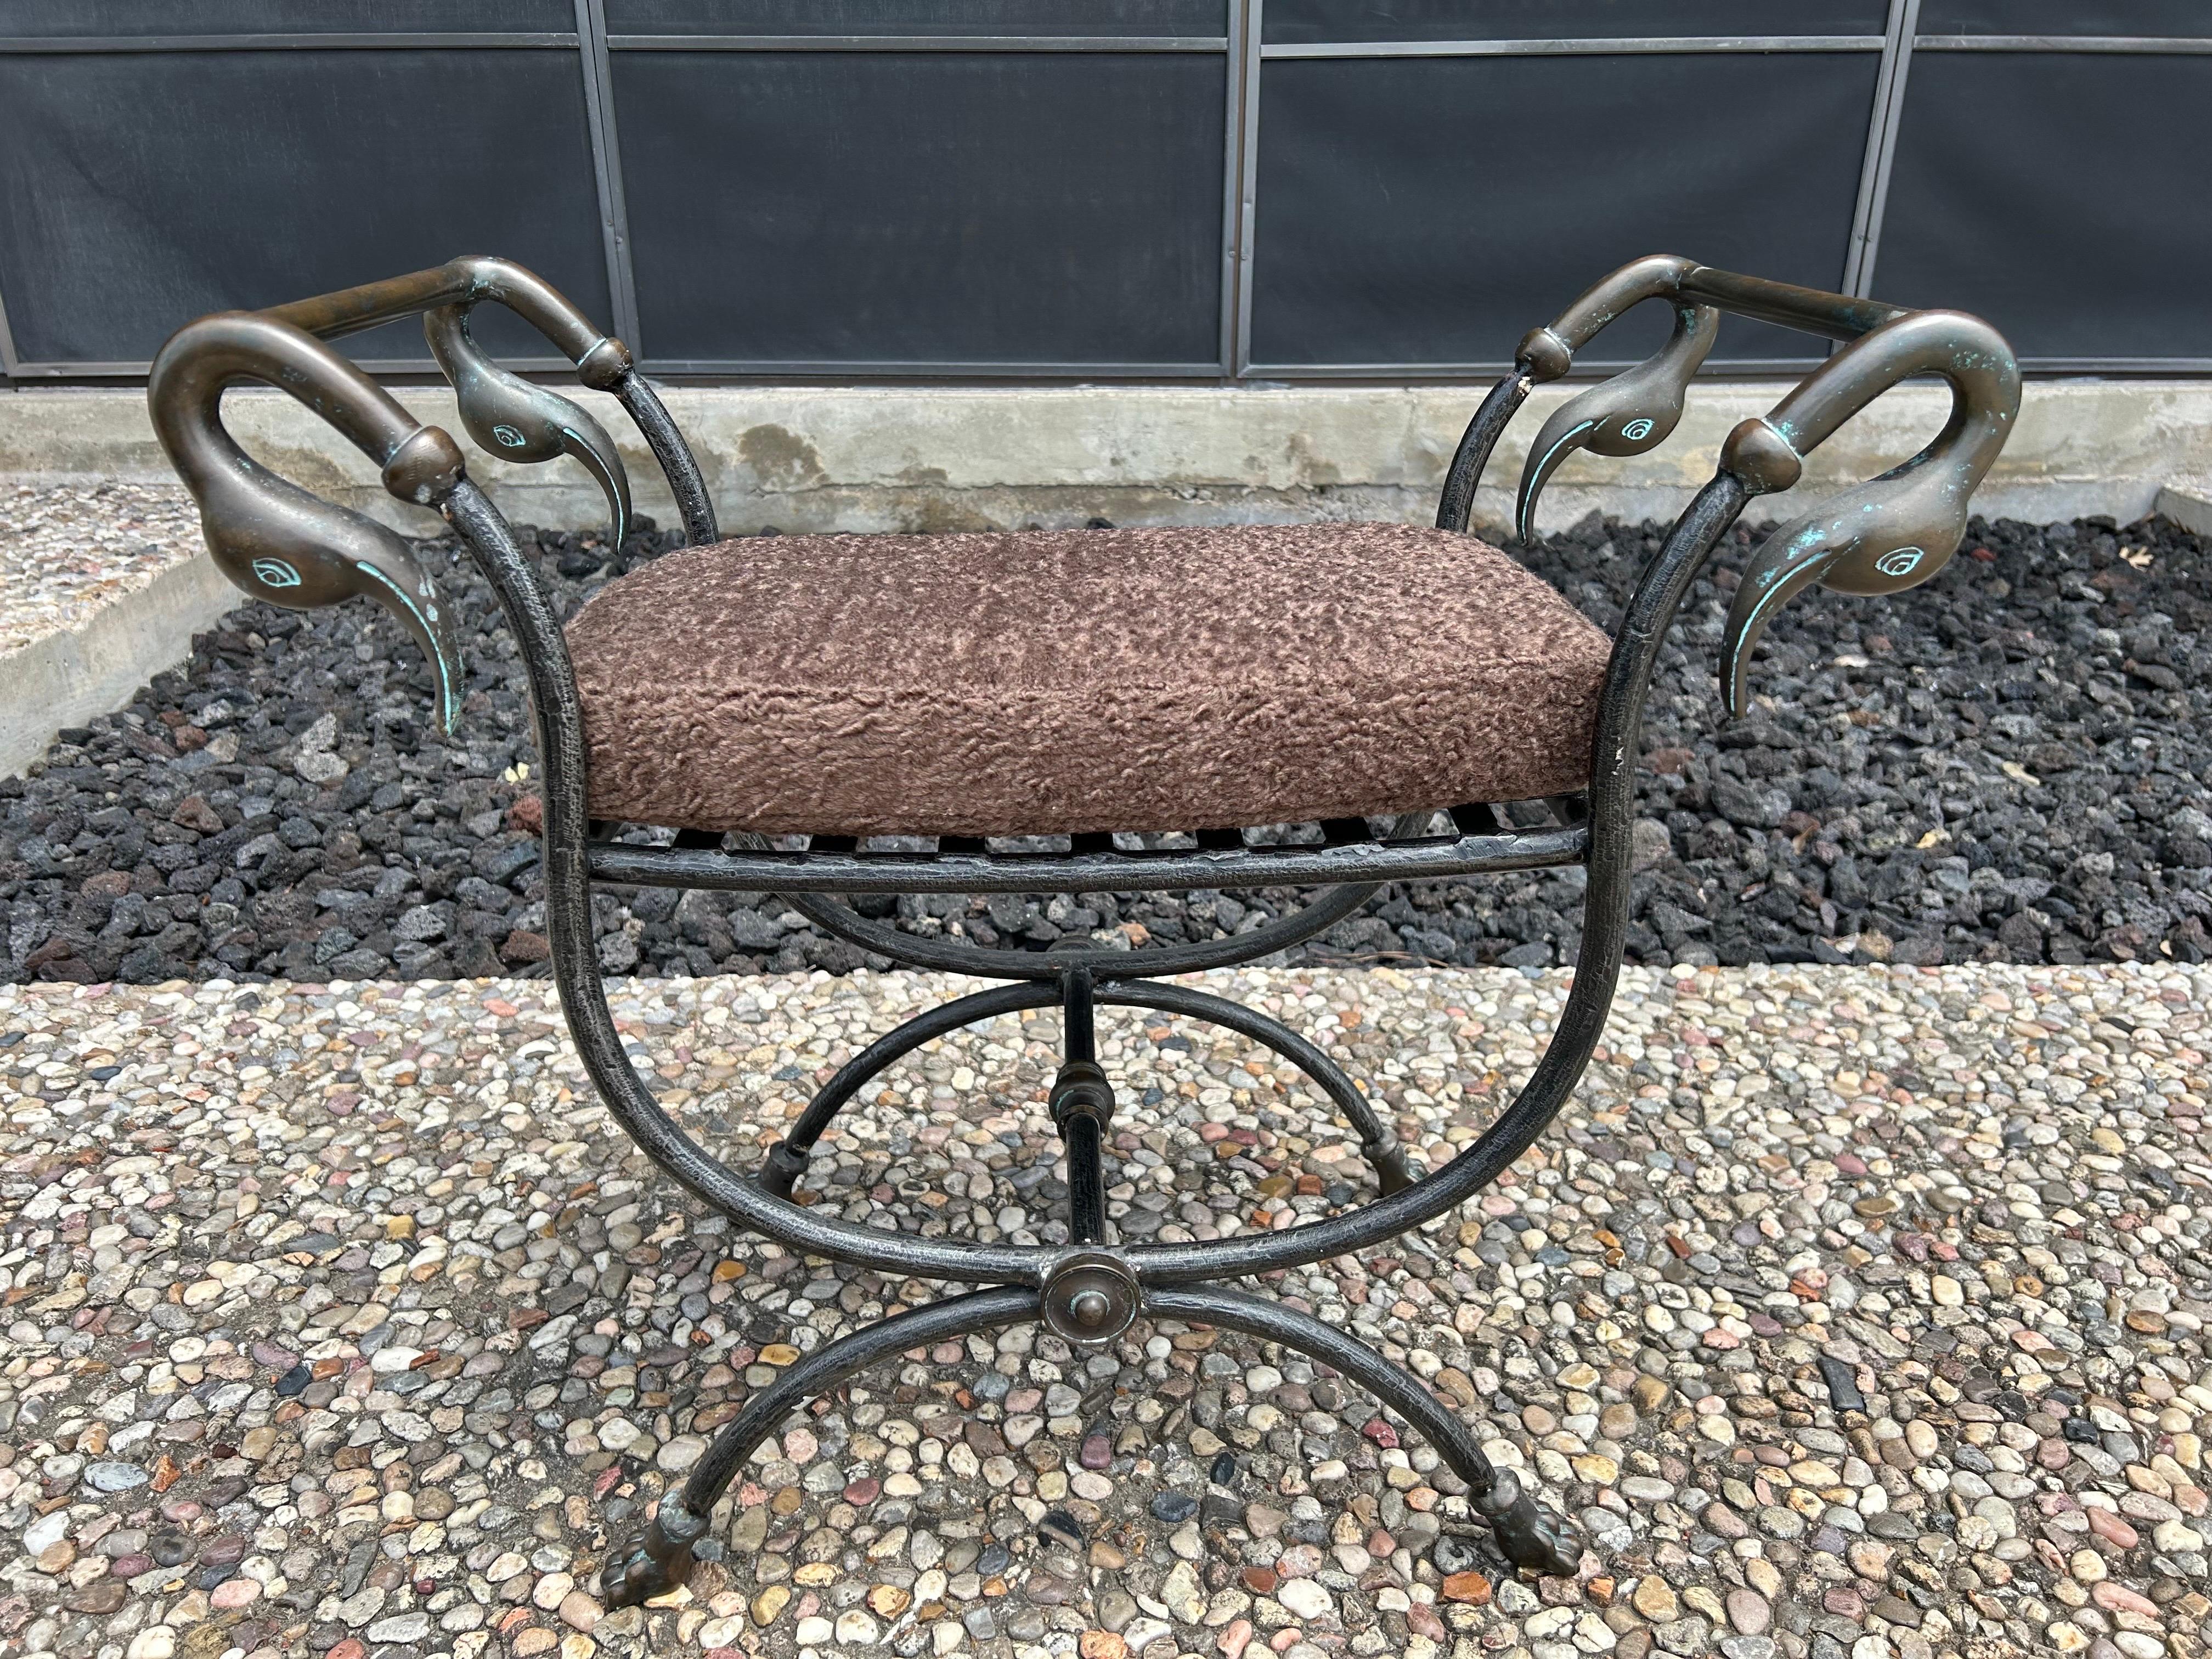 Italian Modern Iron And Bronze Bench.
Stunning Italian Hollywood Regency Heavy Weight Bench Of Iron With Beautiful Bronze Swan Handles. This versatile Italian bench would look great in a variety of interiors. We created a new upholstered cushion.